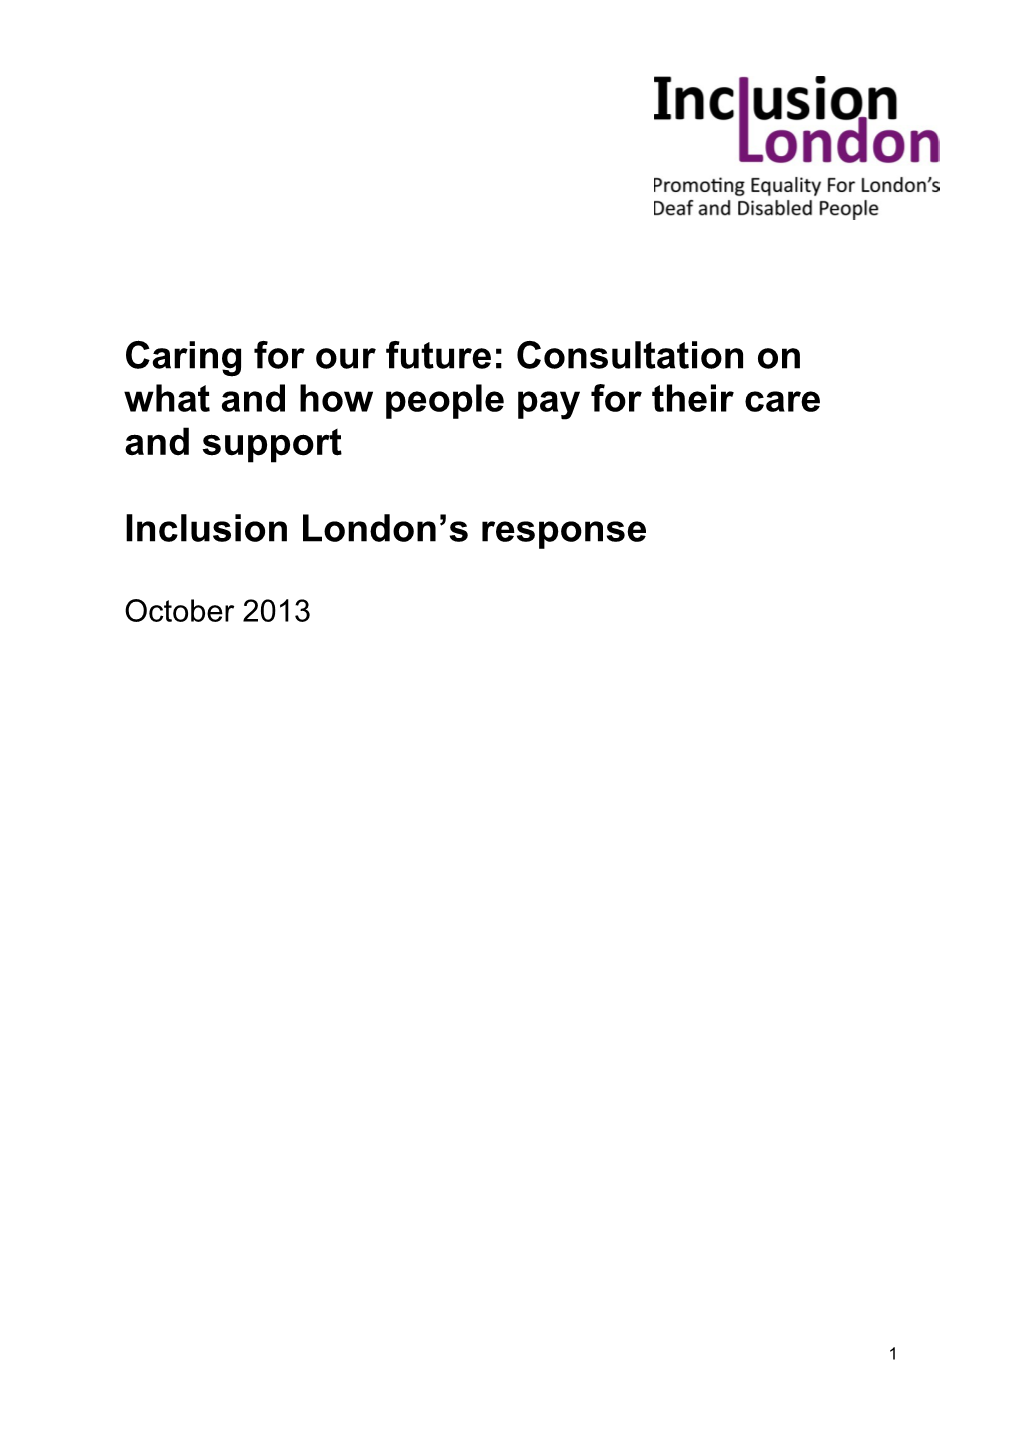 Caring for Our Future: Consultation on What and How People Pay for Their Care and Support